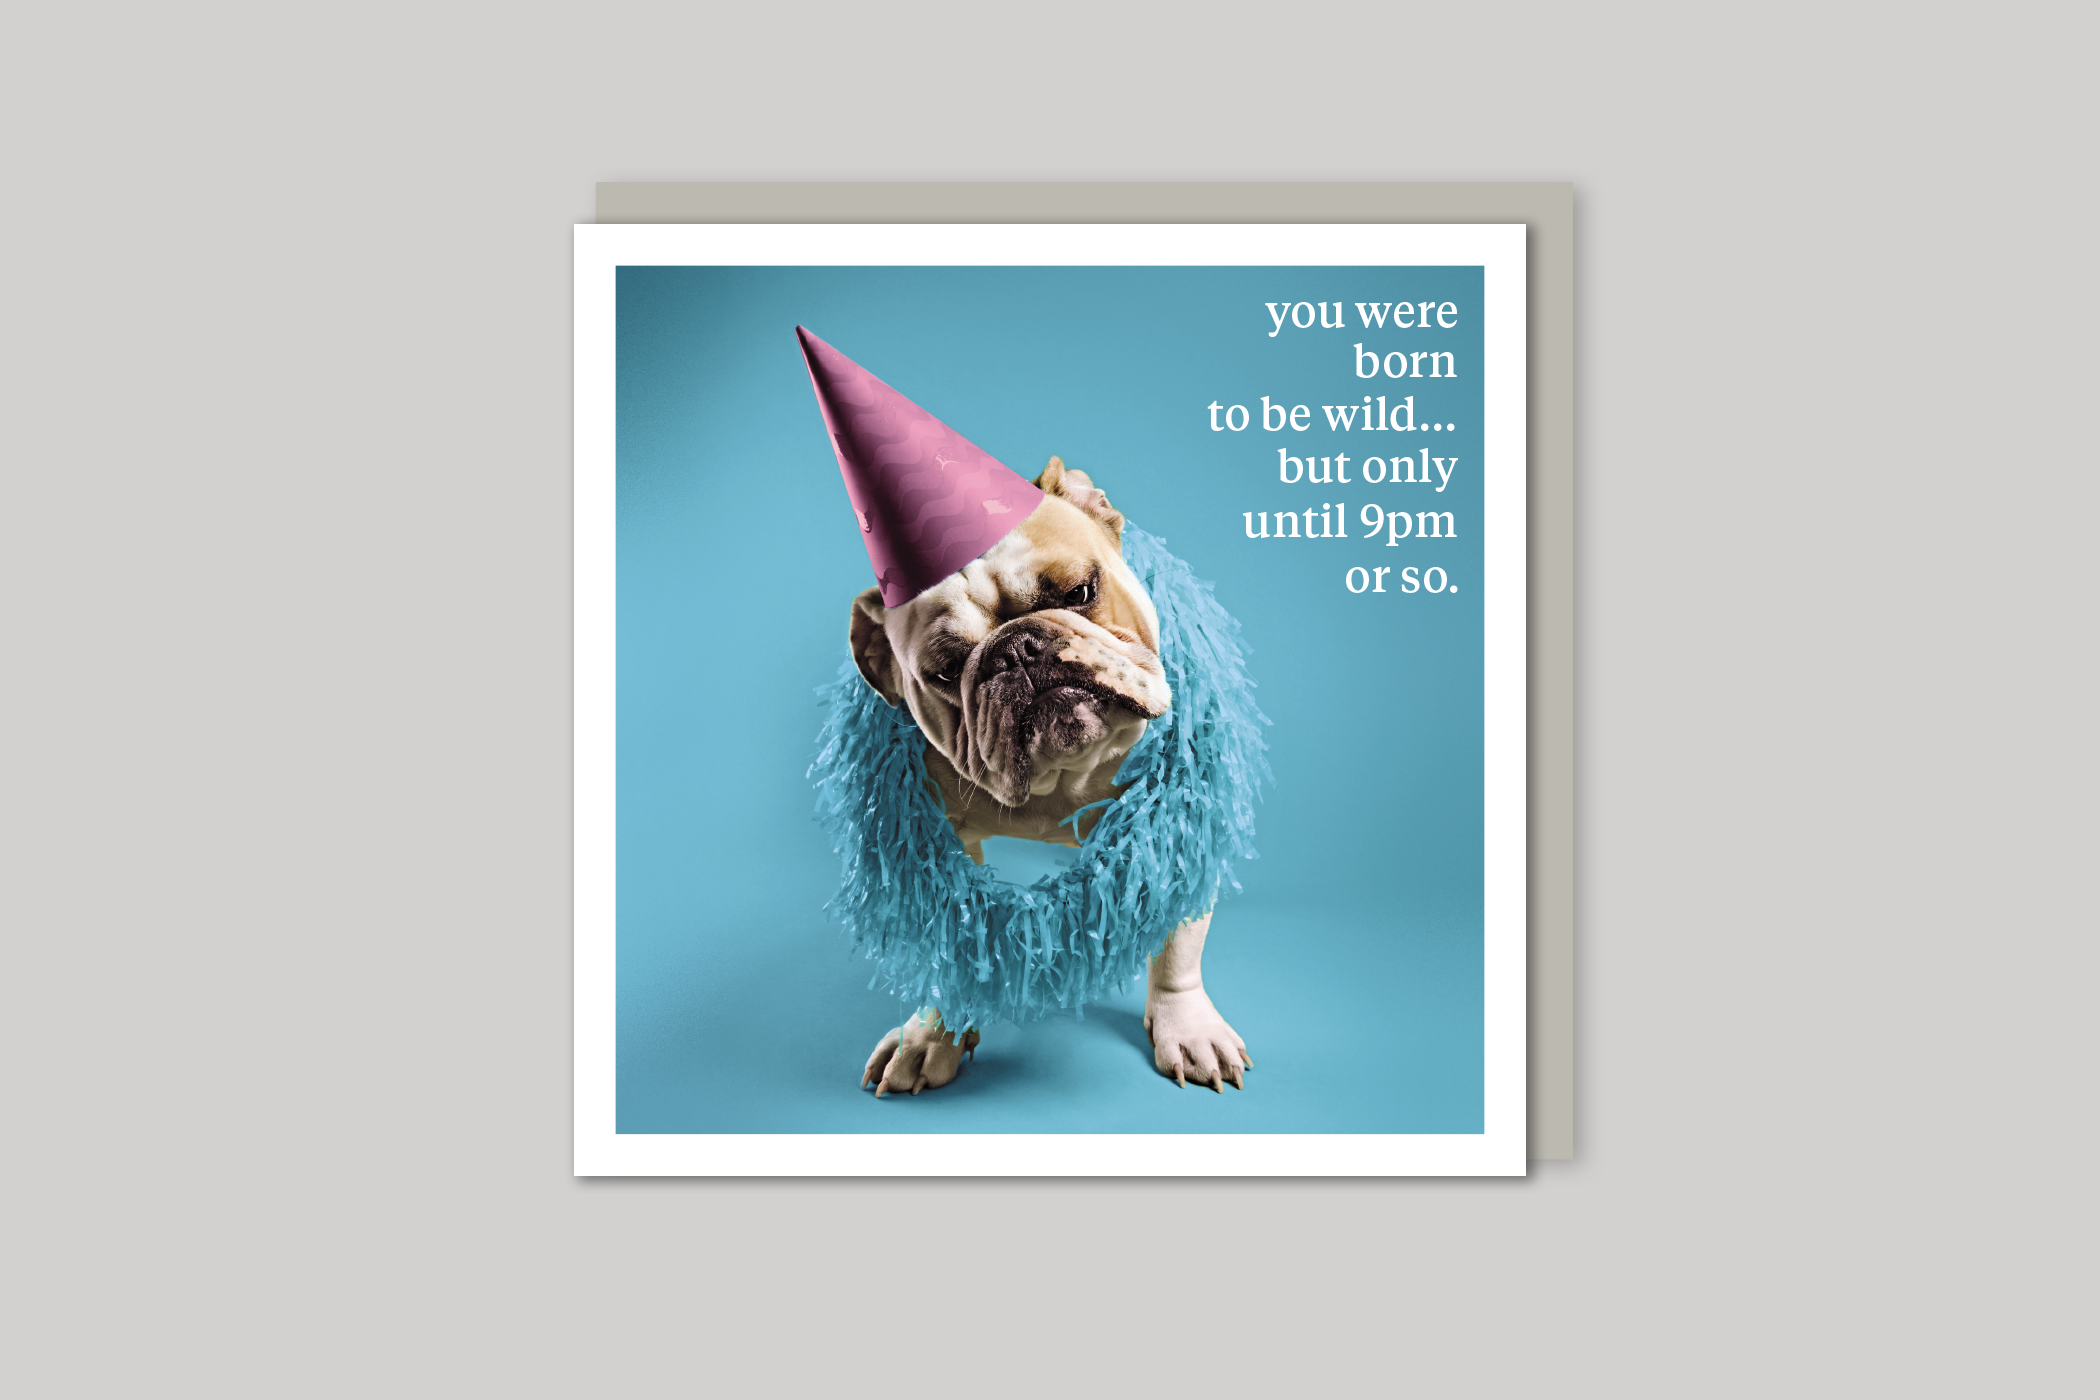 Born To Be Wild quirky animal portrait from Curious World range of greeting cards by Icon, back page.